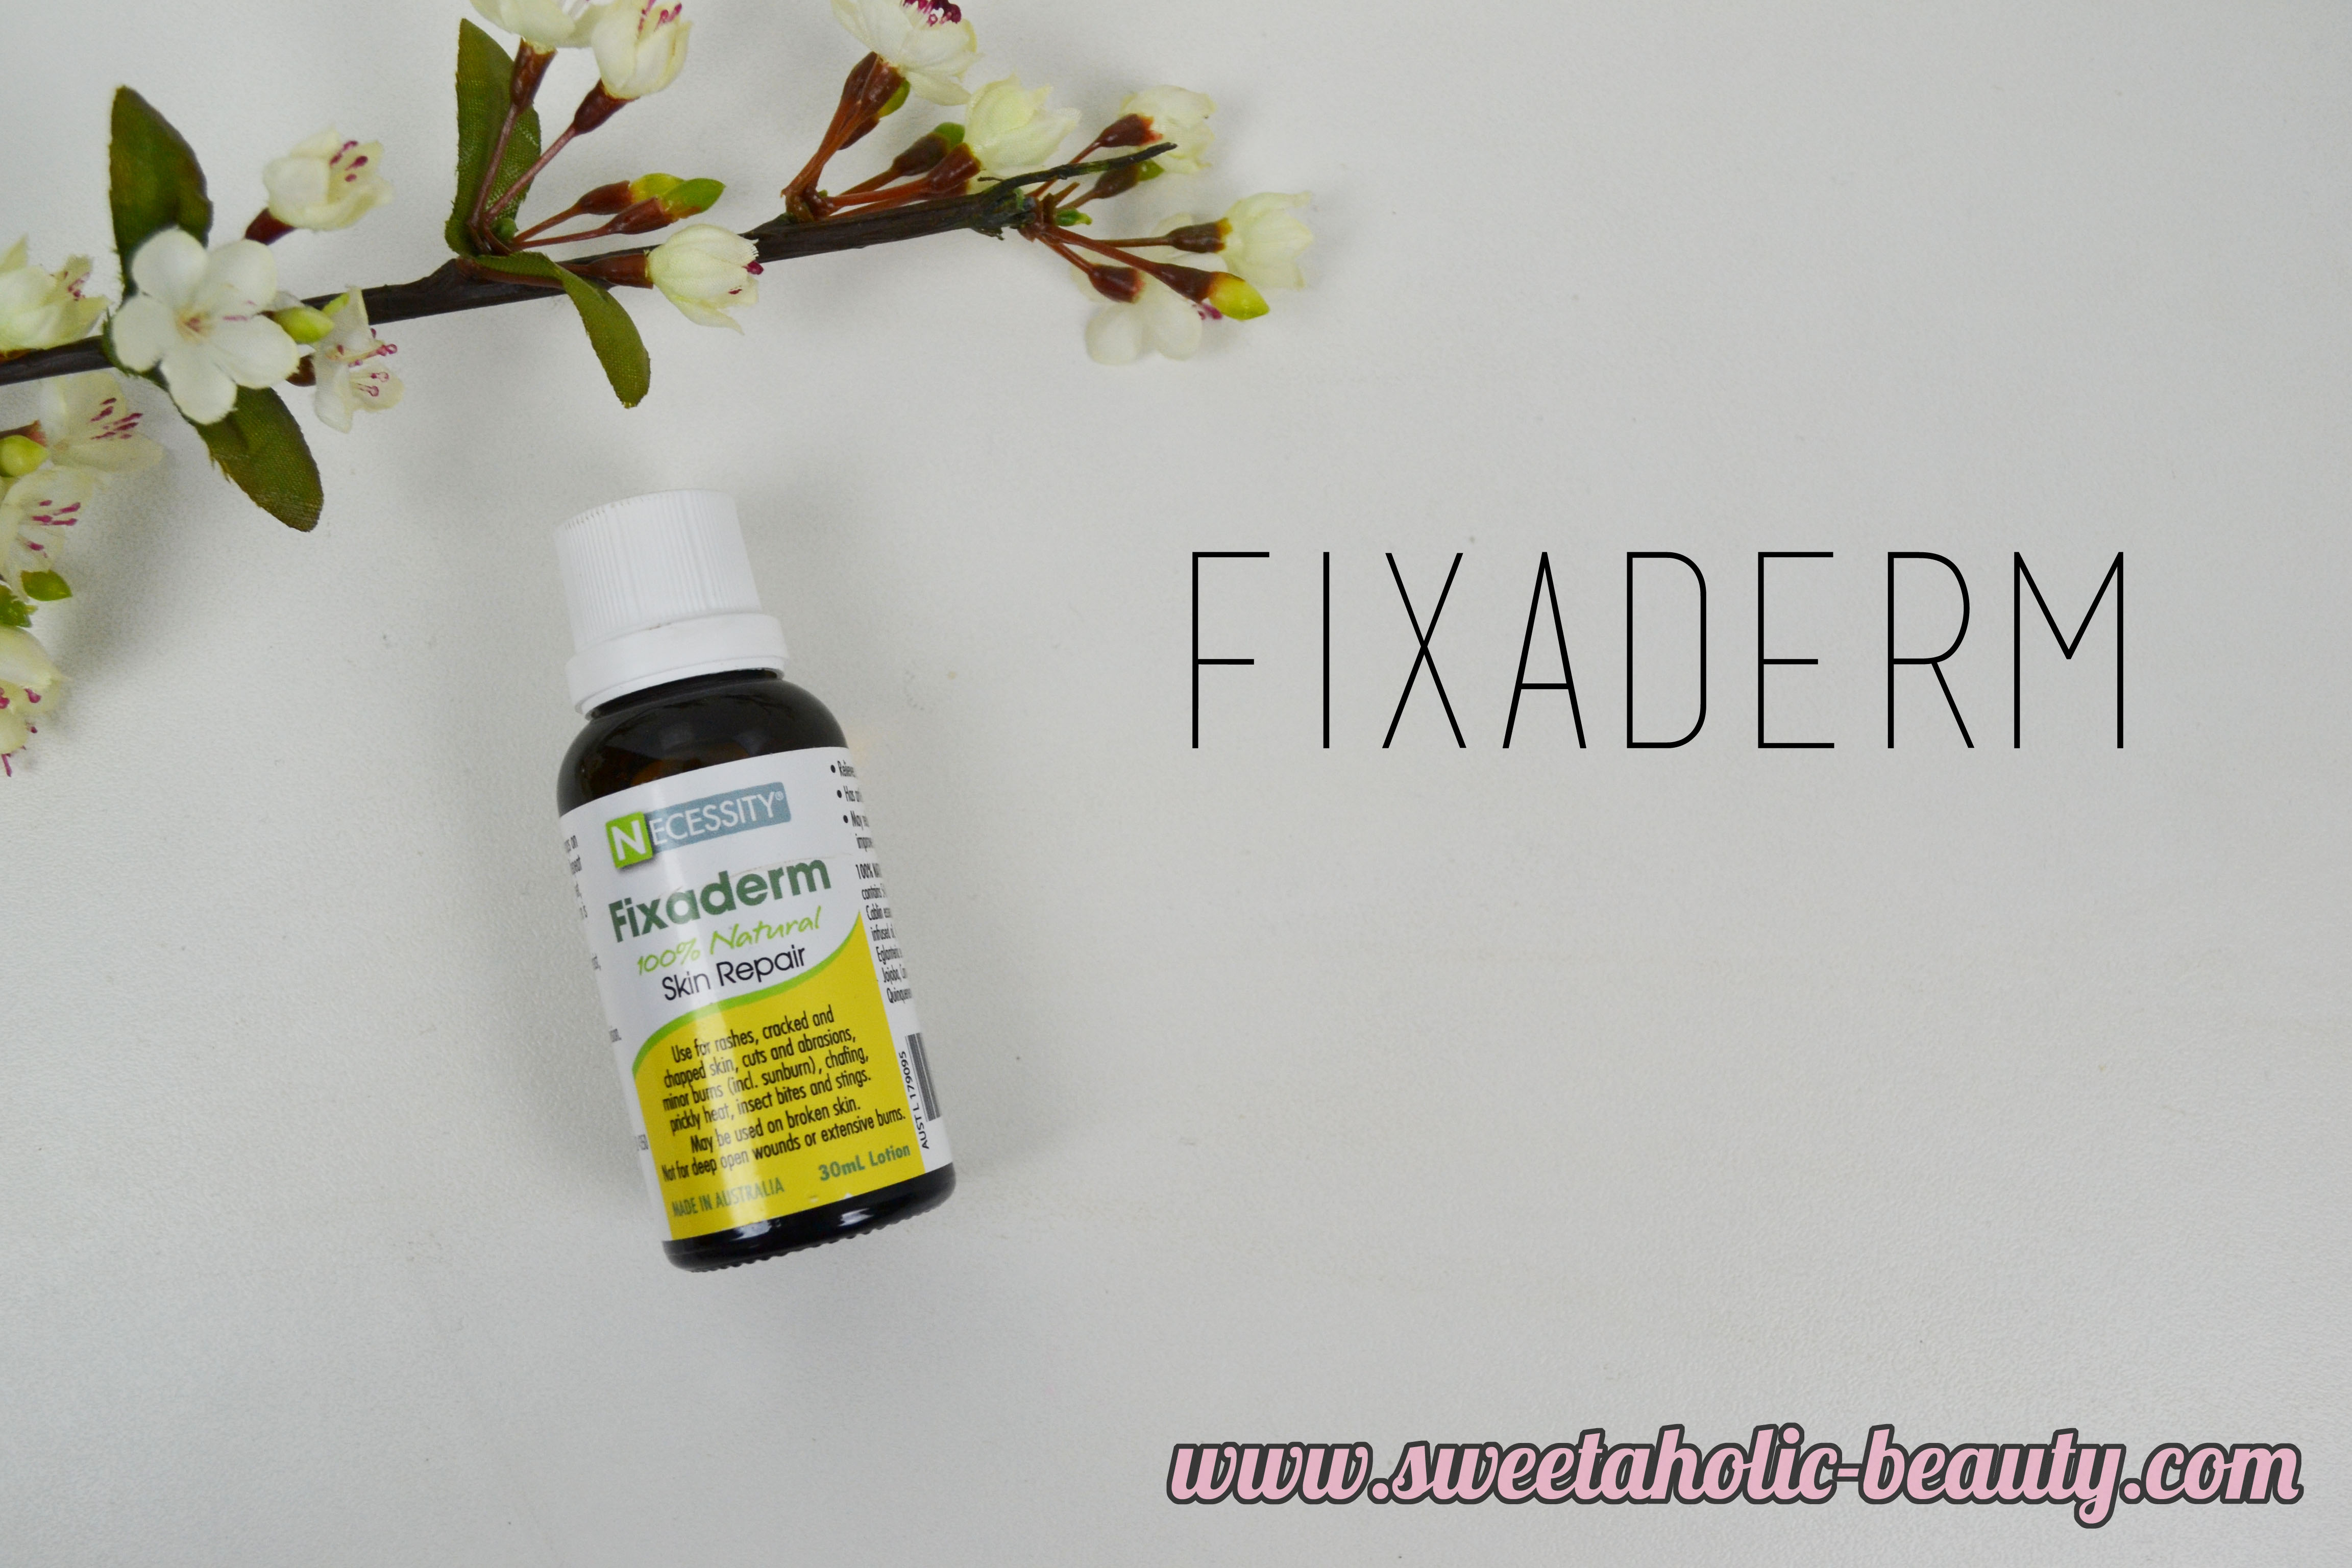 Blemish Busters, Acne, Skincare, Skin Problems, Bbloggers, Fixaderm, The Body Shop, Tea Tree,  